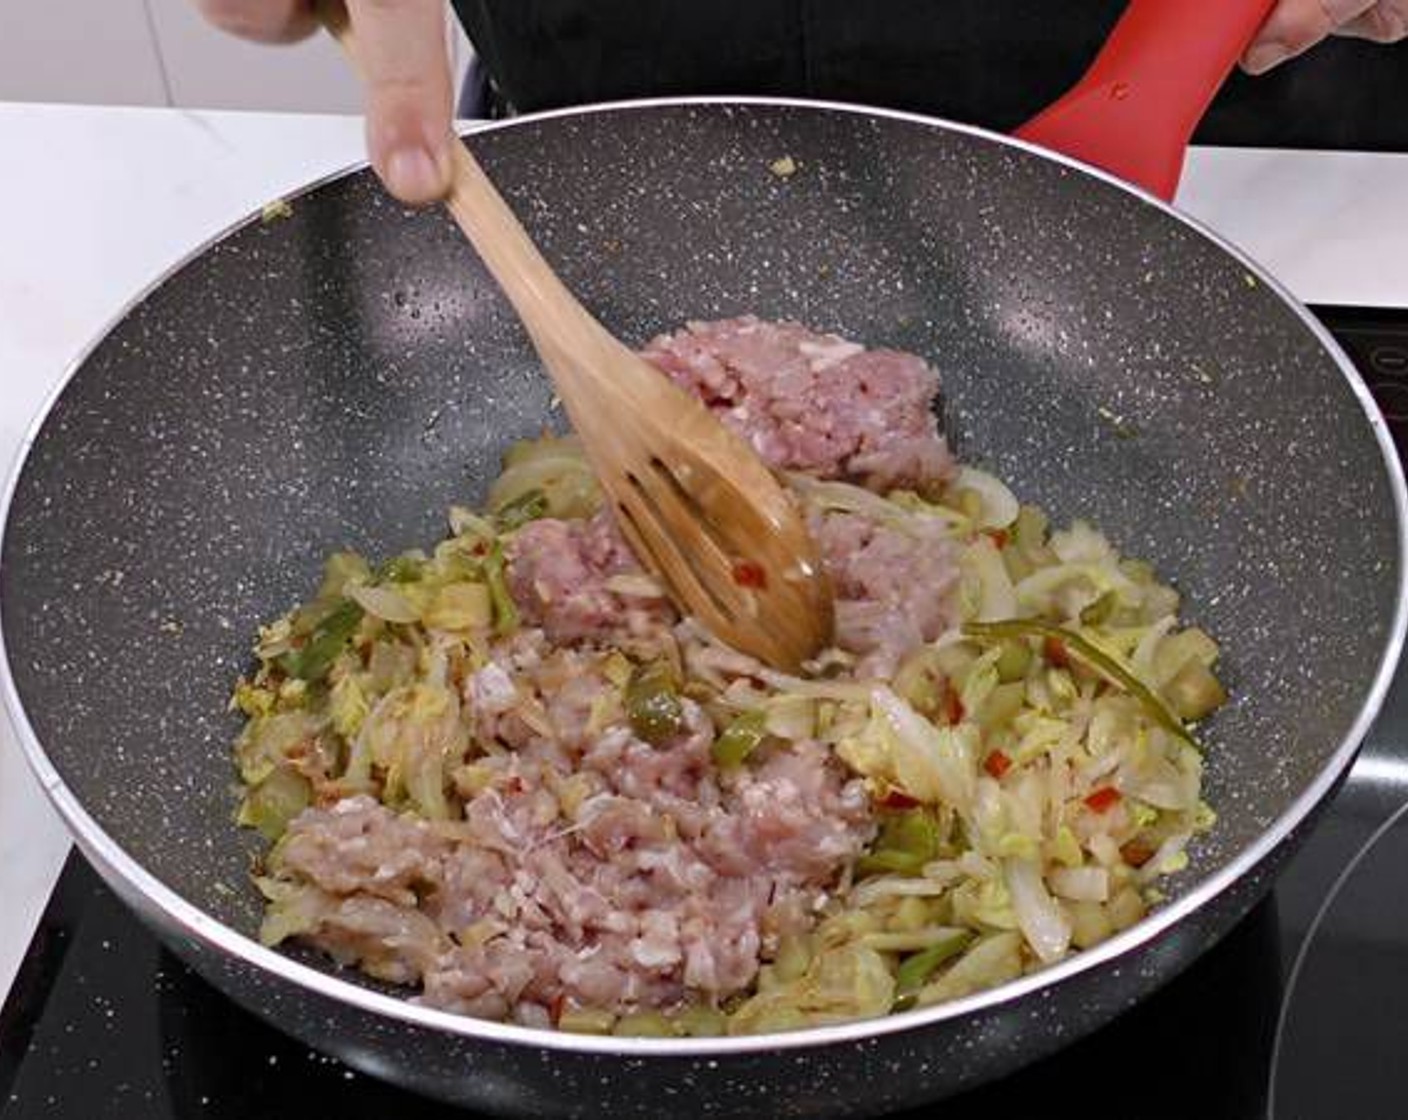 step 9 Add in the Ground Chicken (to taste) and mince into the veggies as you mix thoroughly.